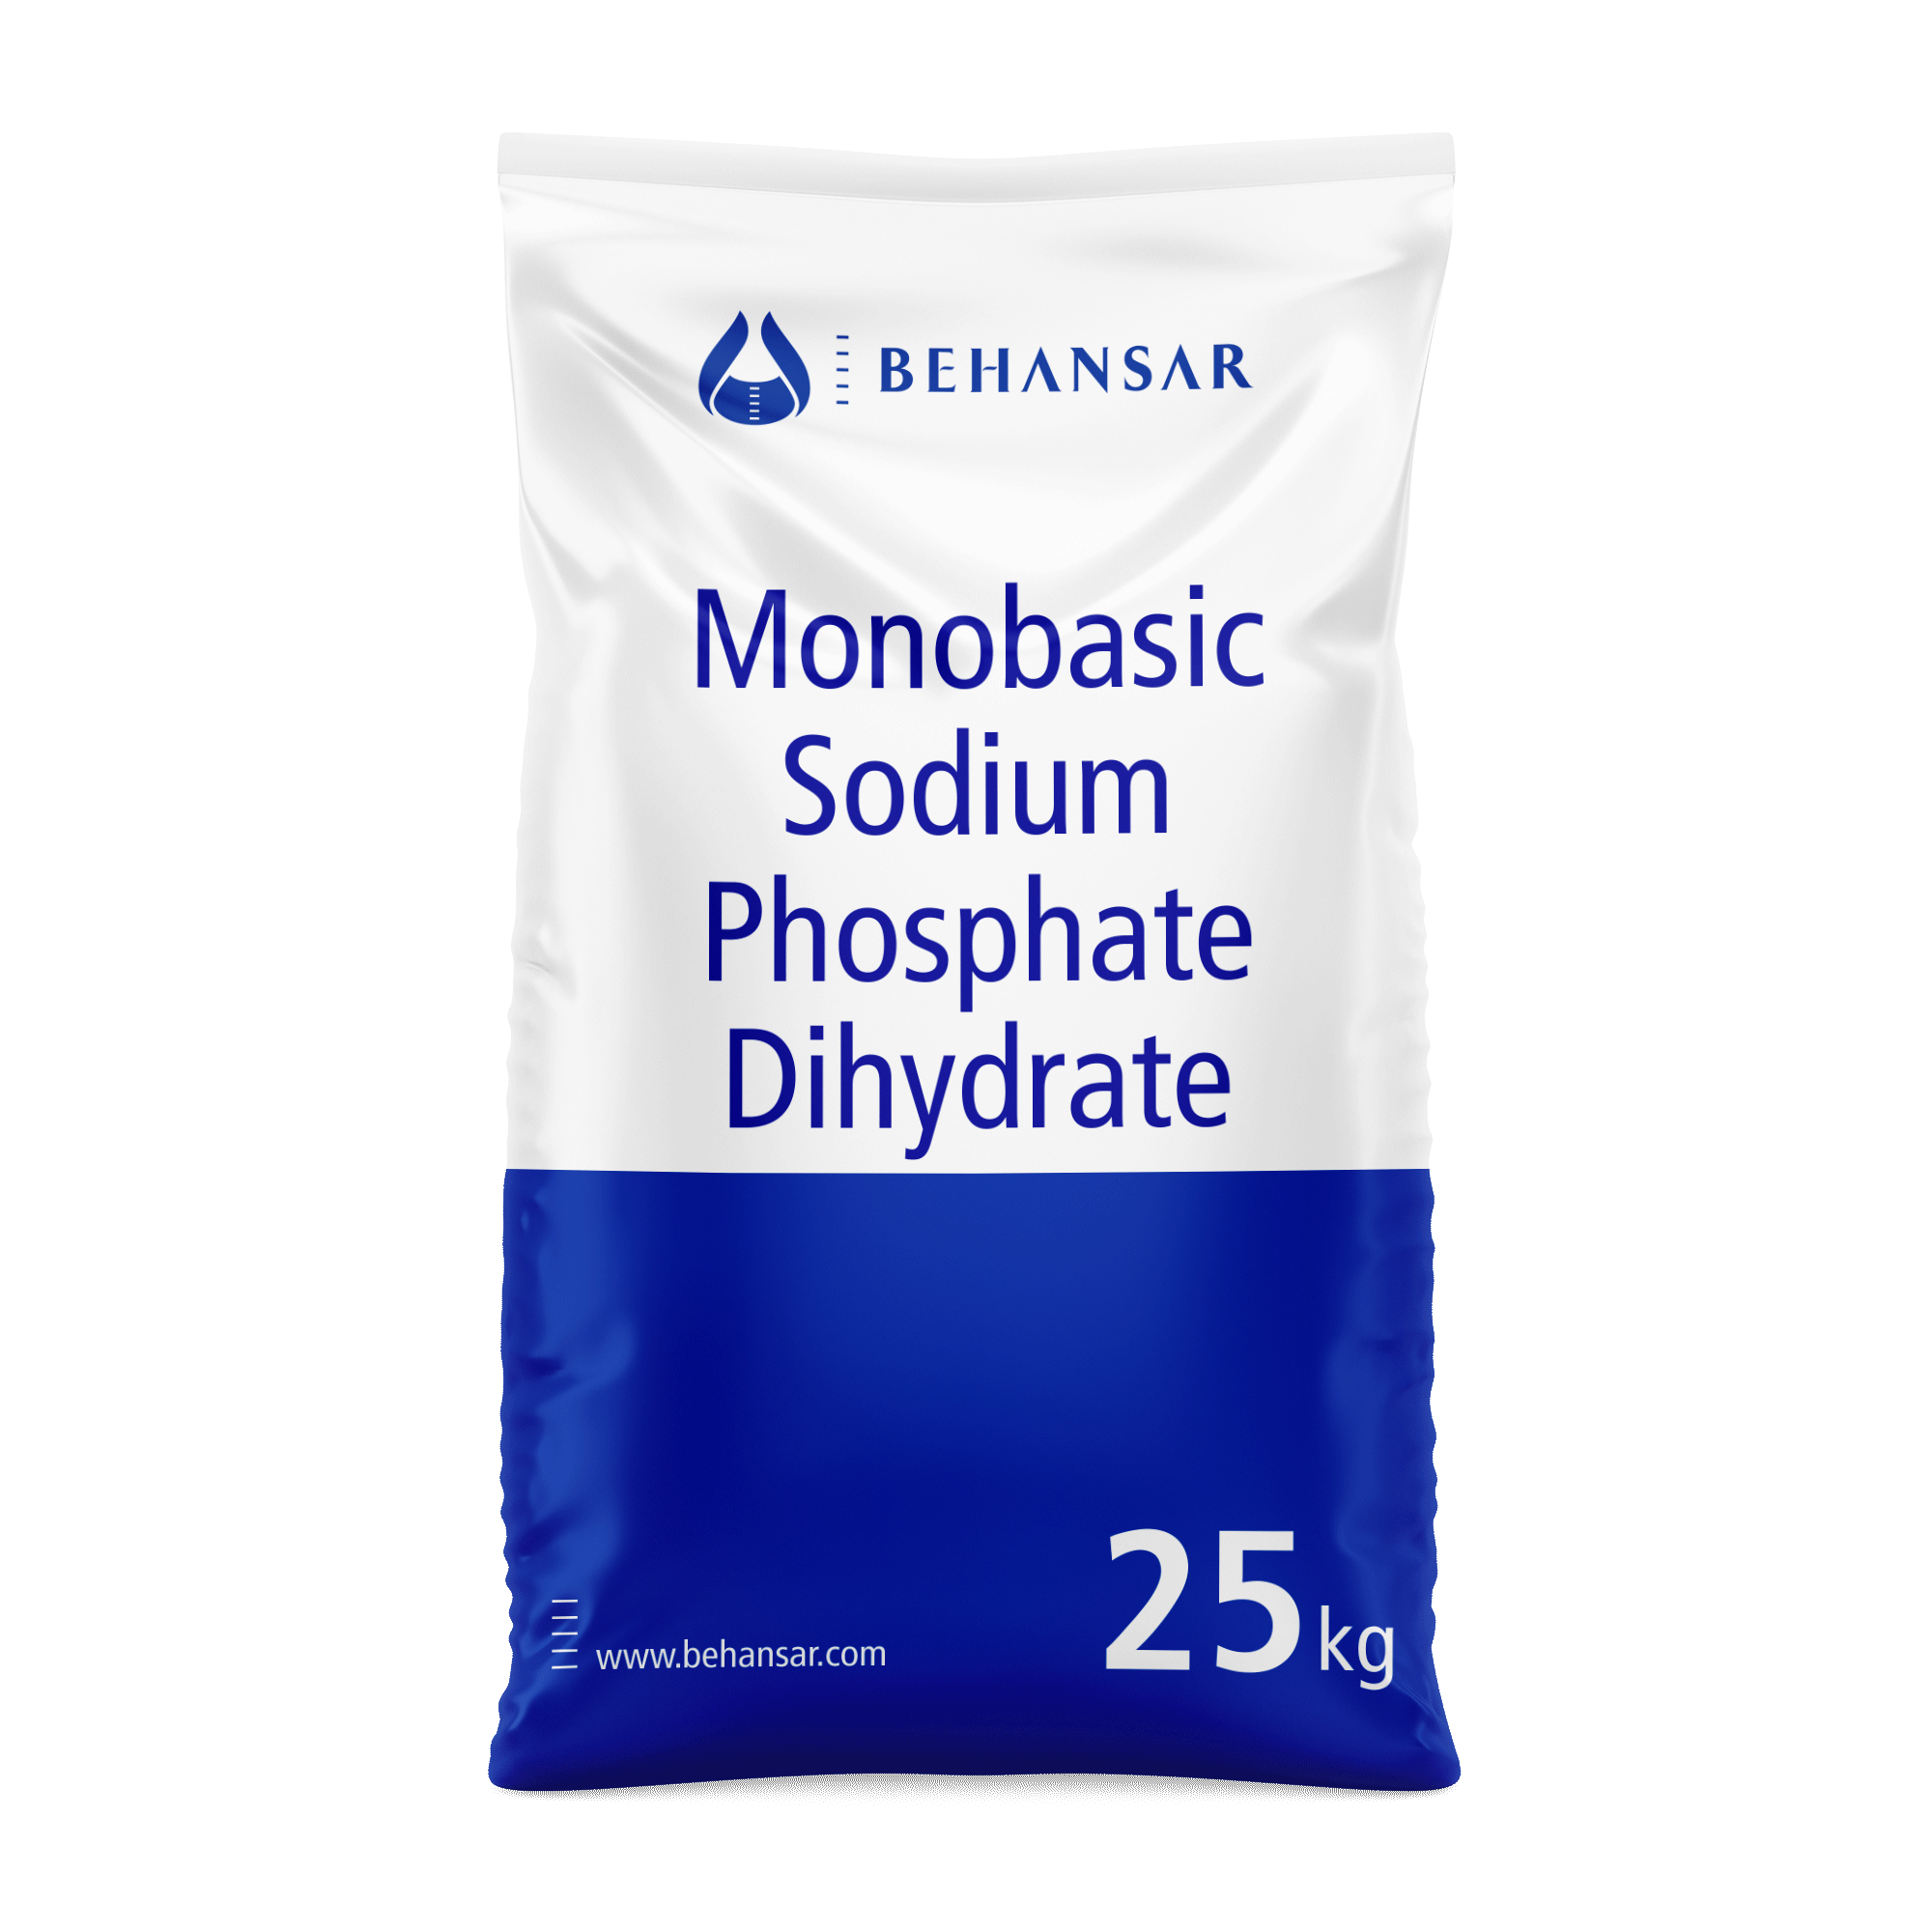 Monobasic Sodium Phosphate Dihydrate is one of the products of Behansar Co